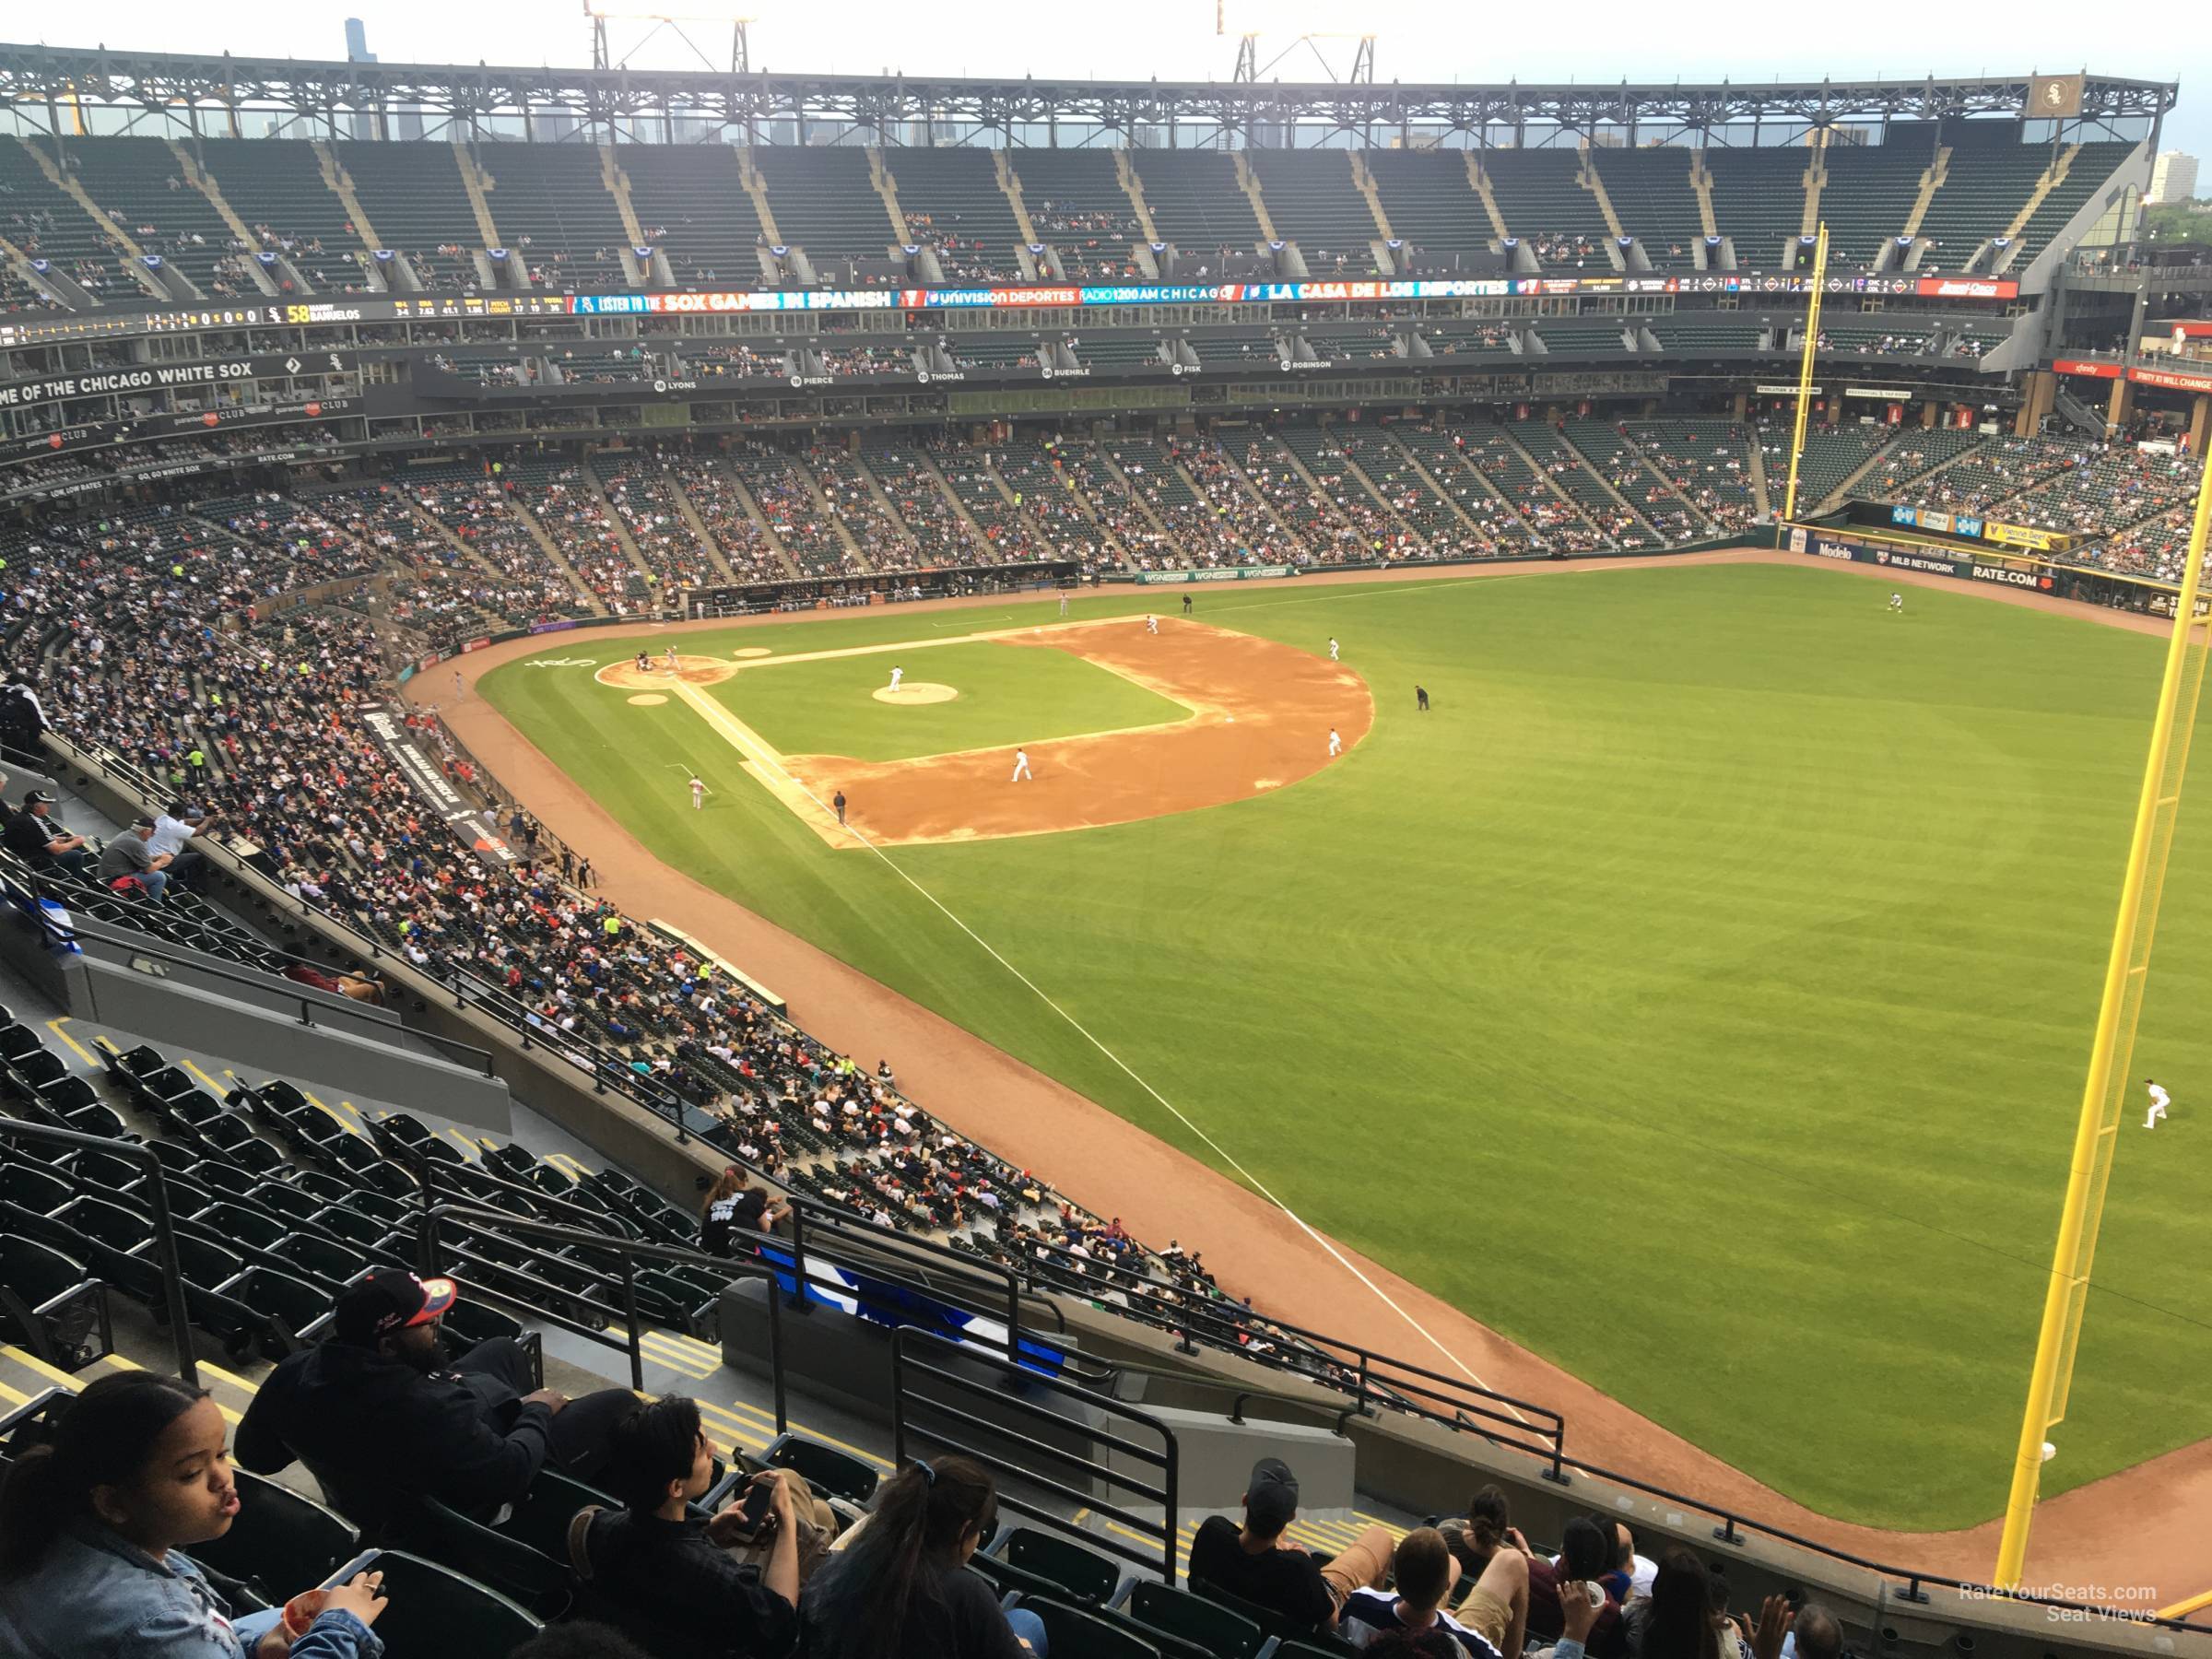 A White Sox Game at Guaranteed Rate Field